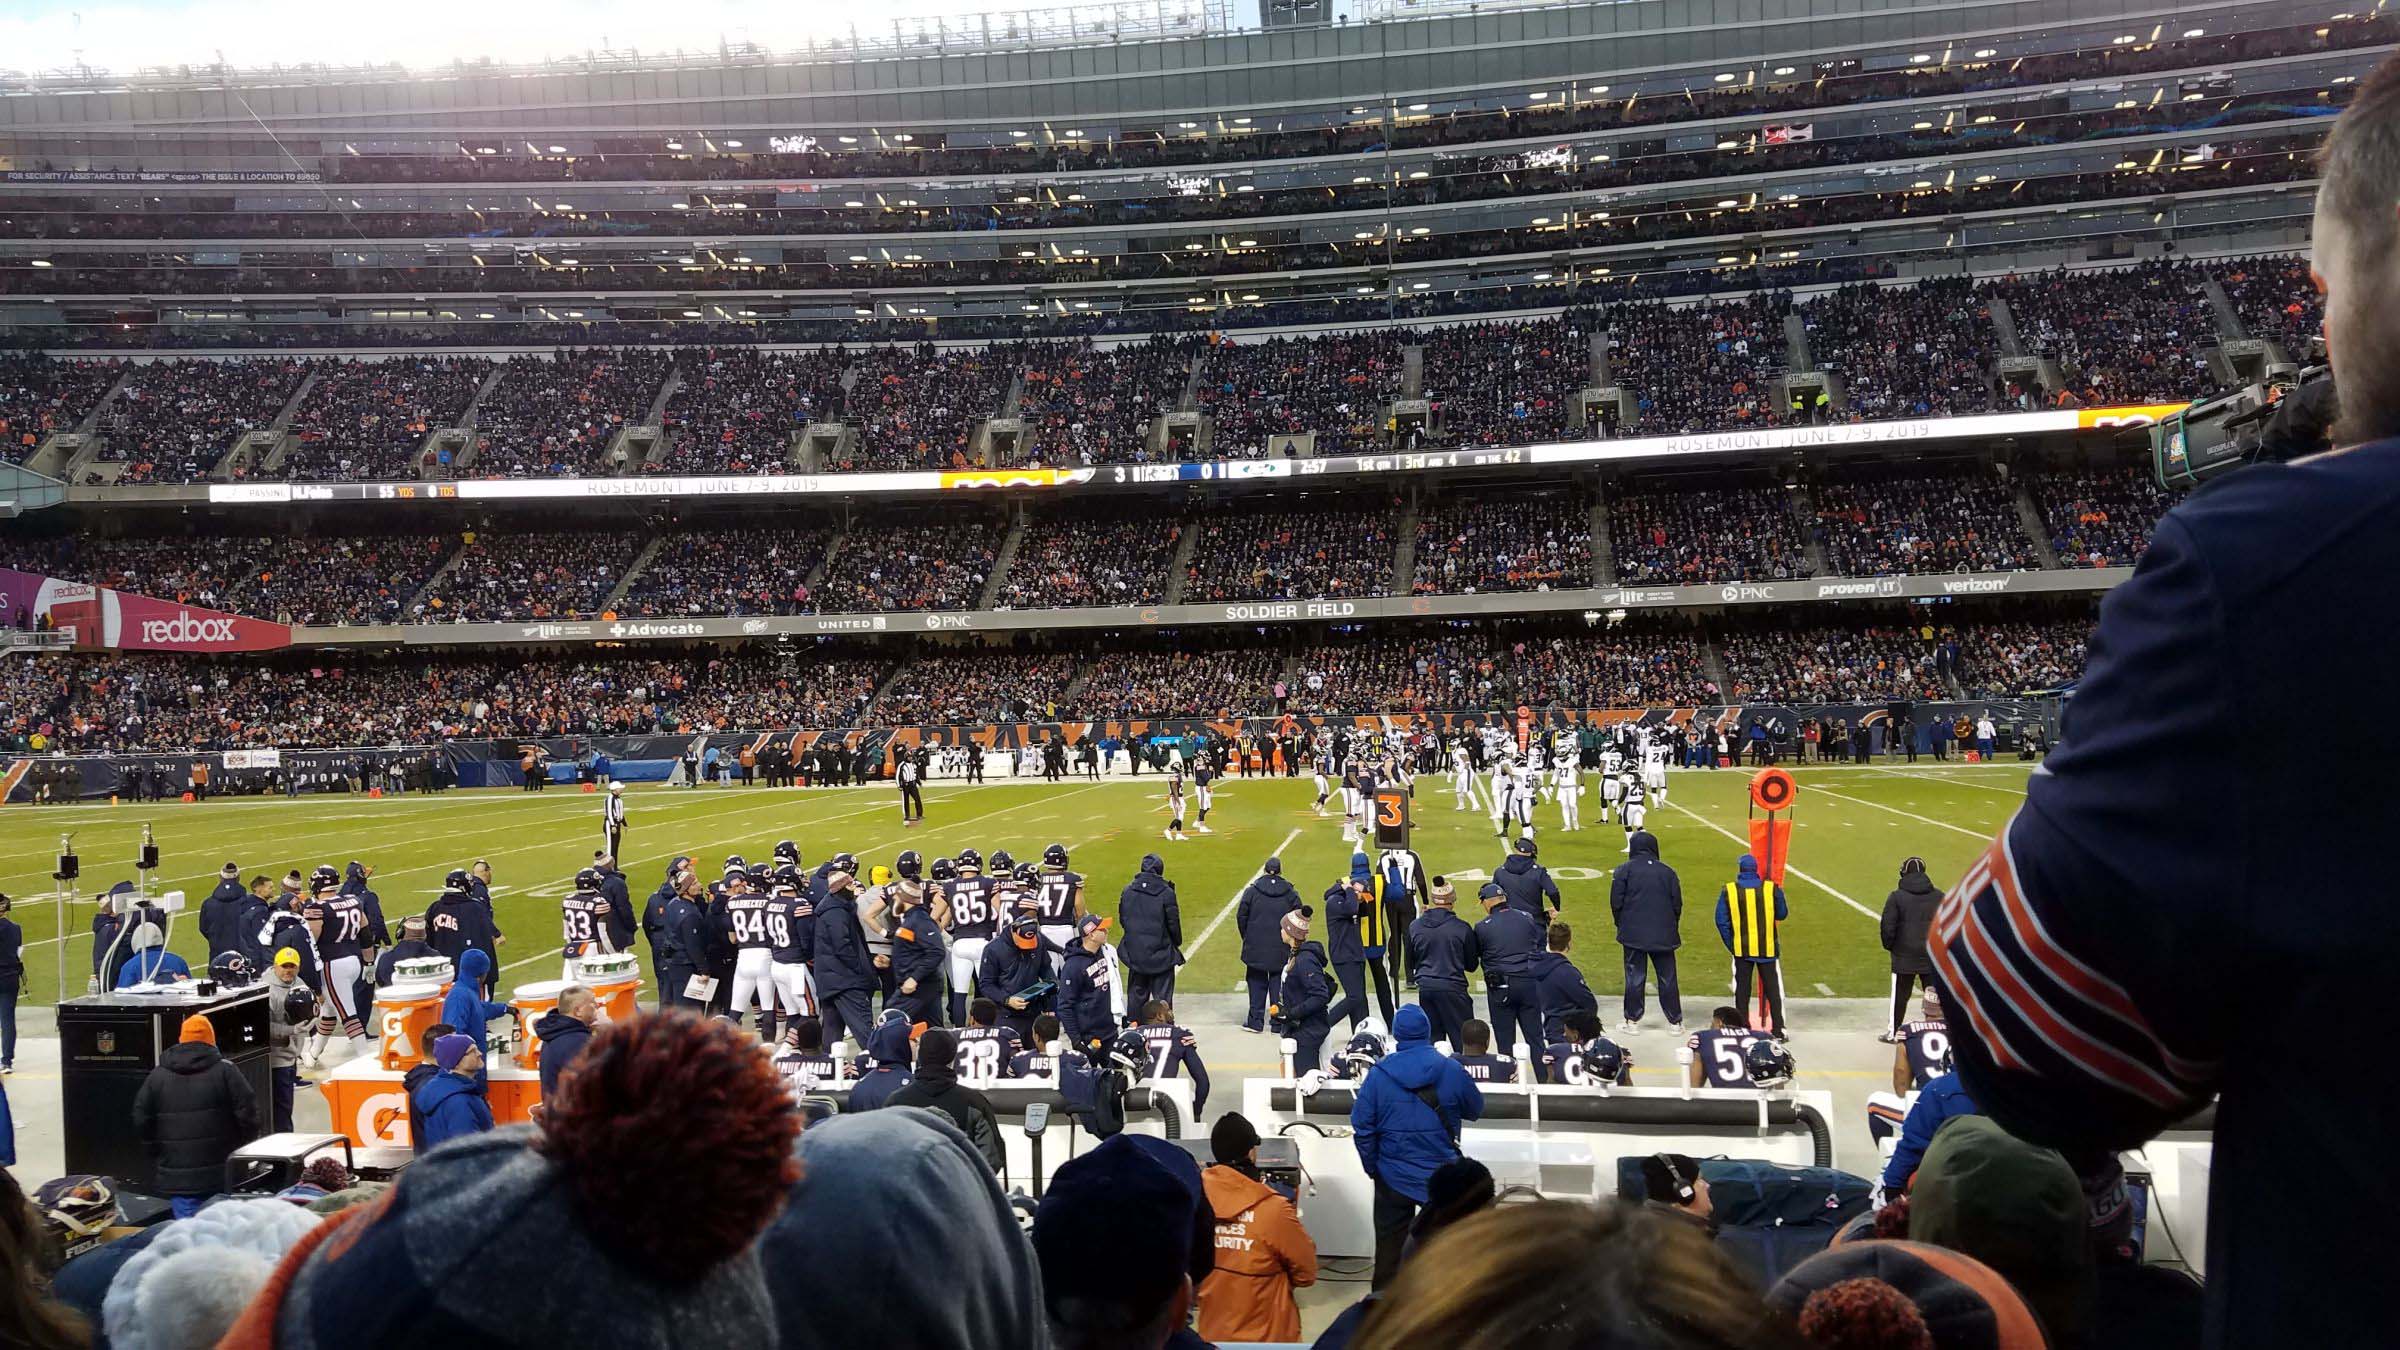 section 136, row 5 seat view  for football - soldier field